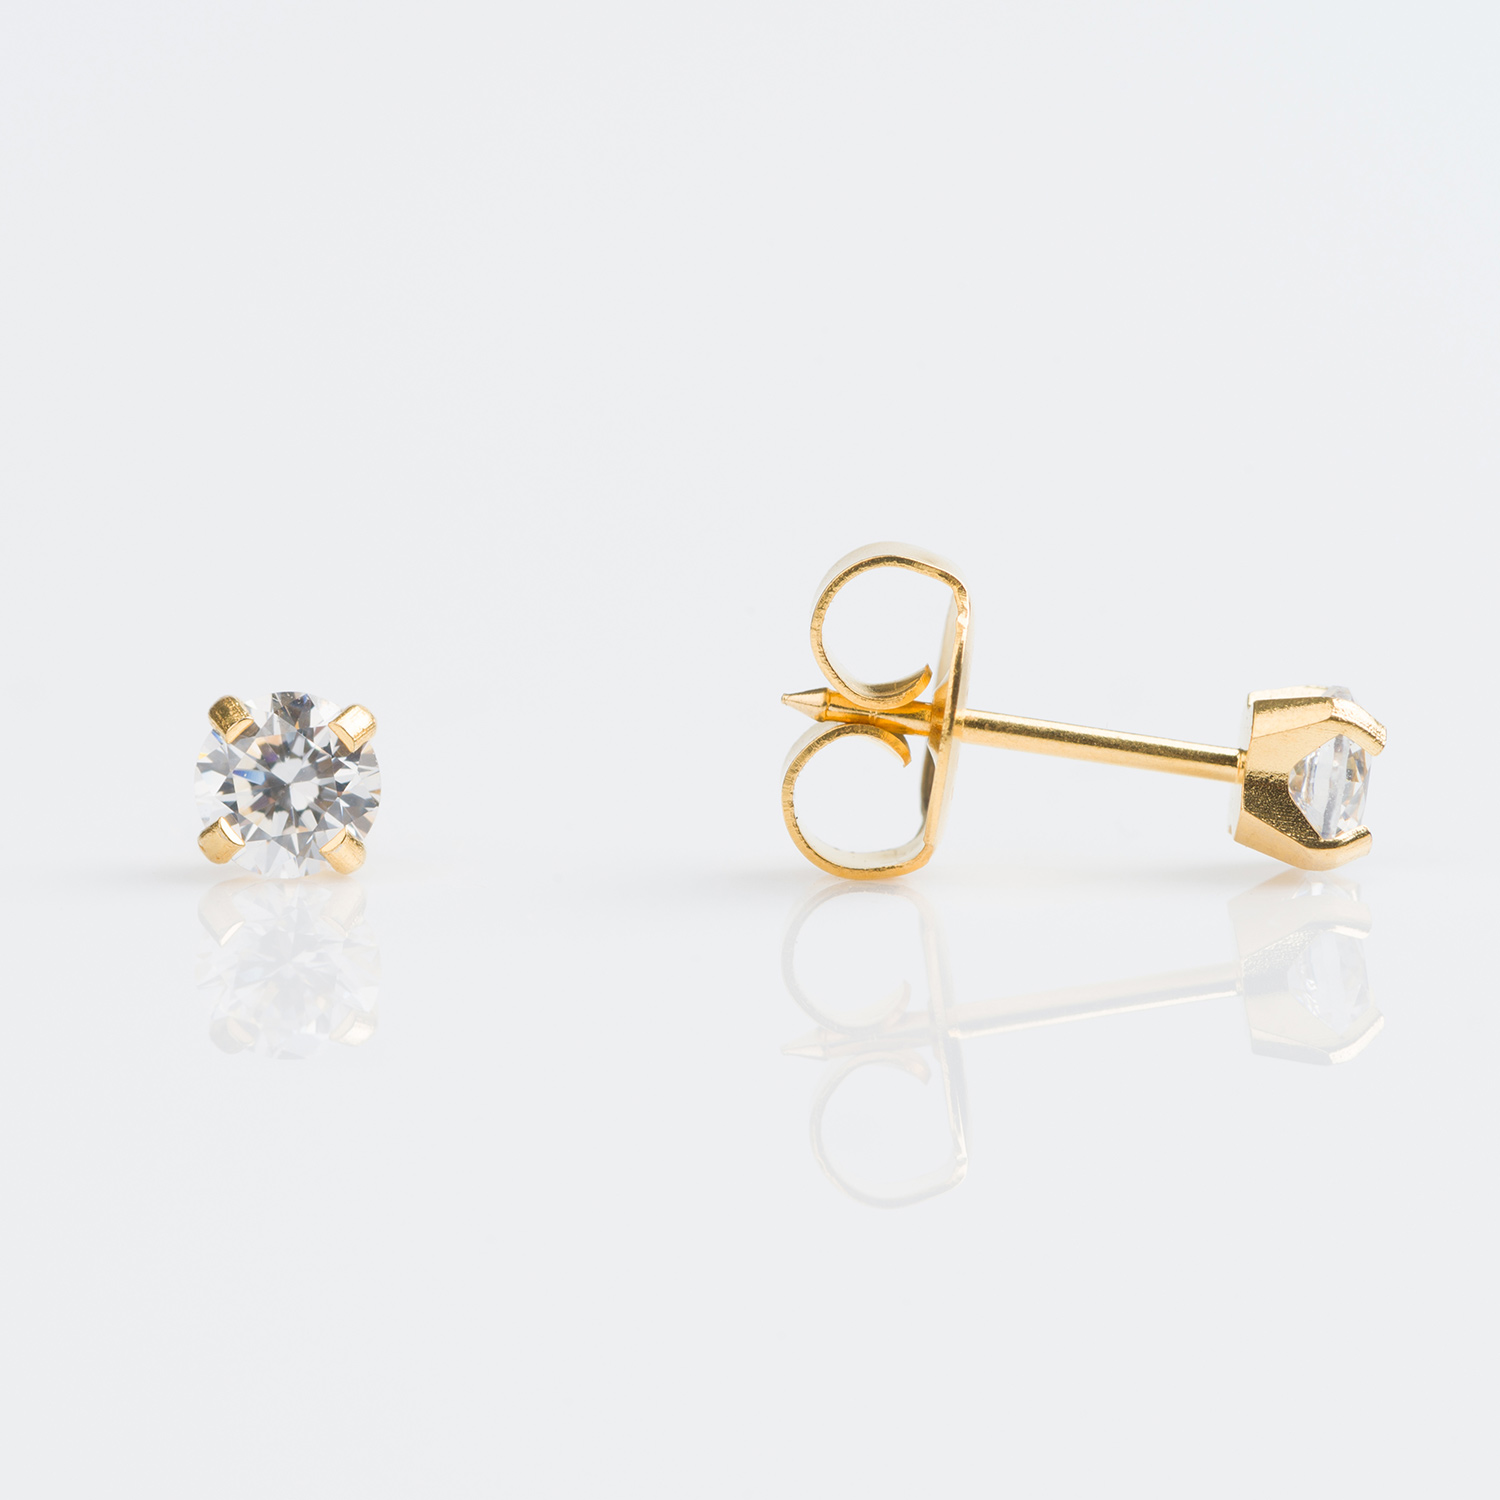 Studex Tiny Tips Gold Plated Tiff. 4mm Cubic Zirconia Stud Earrings